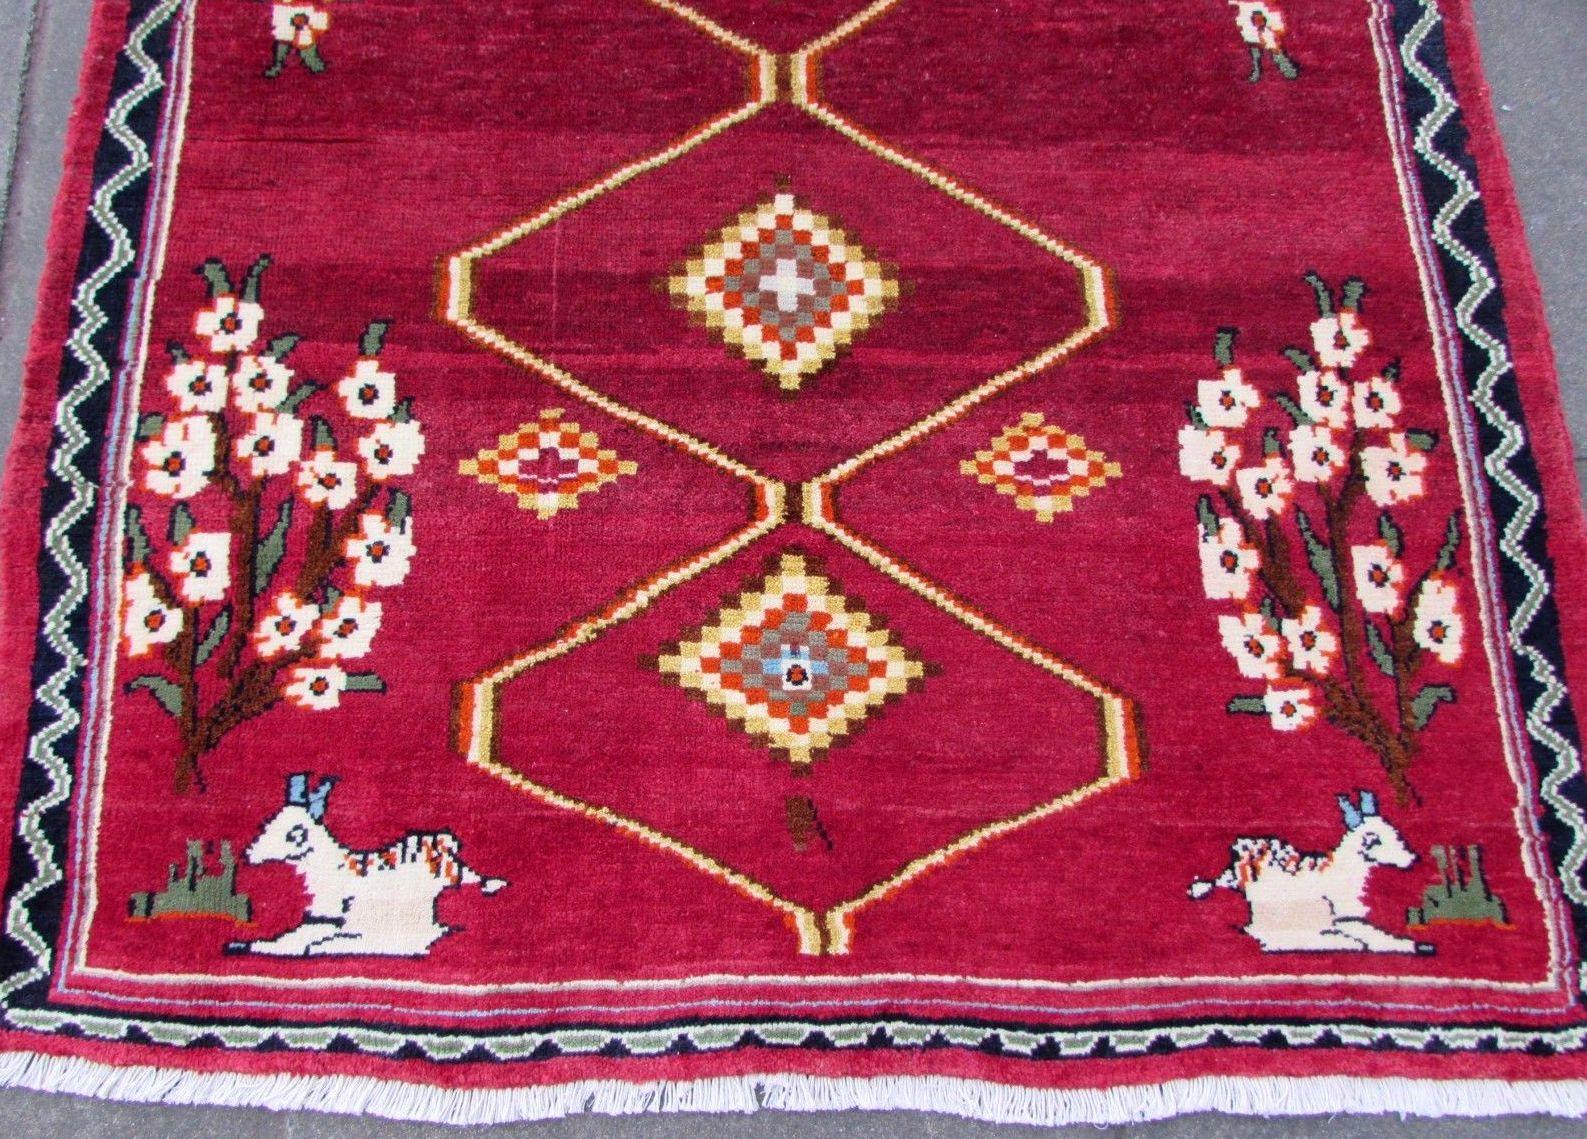 Handmade vintage Gabbeh style rug in bright red wool with animal scenes. The rug is from the end of 20th century in original good condition.

- Condition: original good,

- circa: 1980s,

- Size: 4.2' x 5.5' (126cm x 162cm),

- Material: